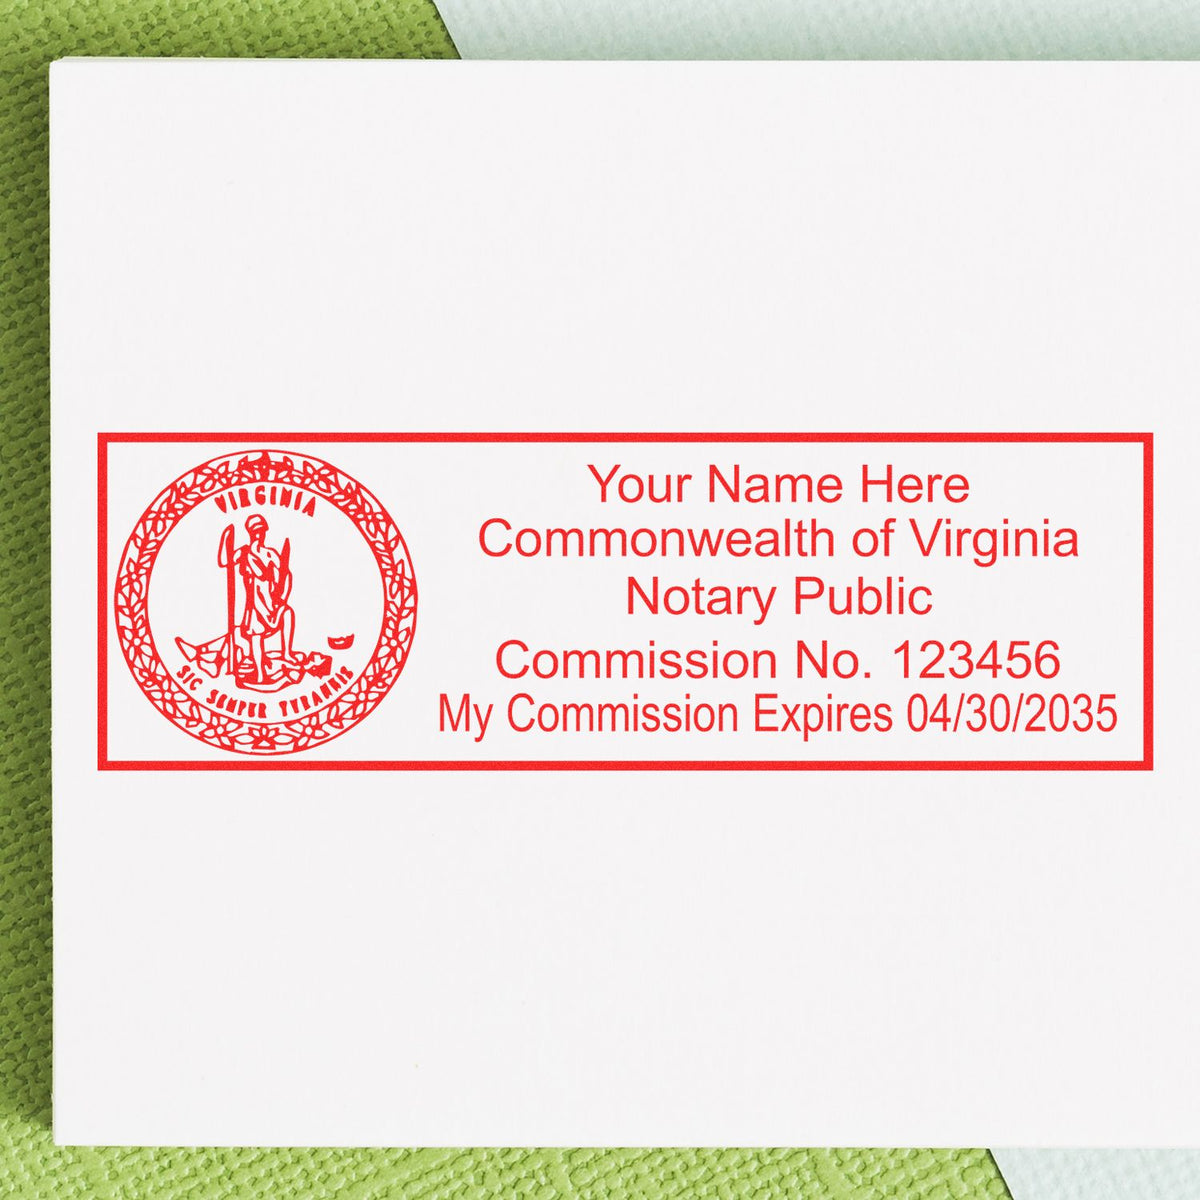 An alternative view of the MaxLight Premium Pre-Inked Virginia State Seal Notarial Stamp stamped on a sheet of paper showing the image in use